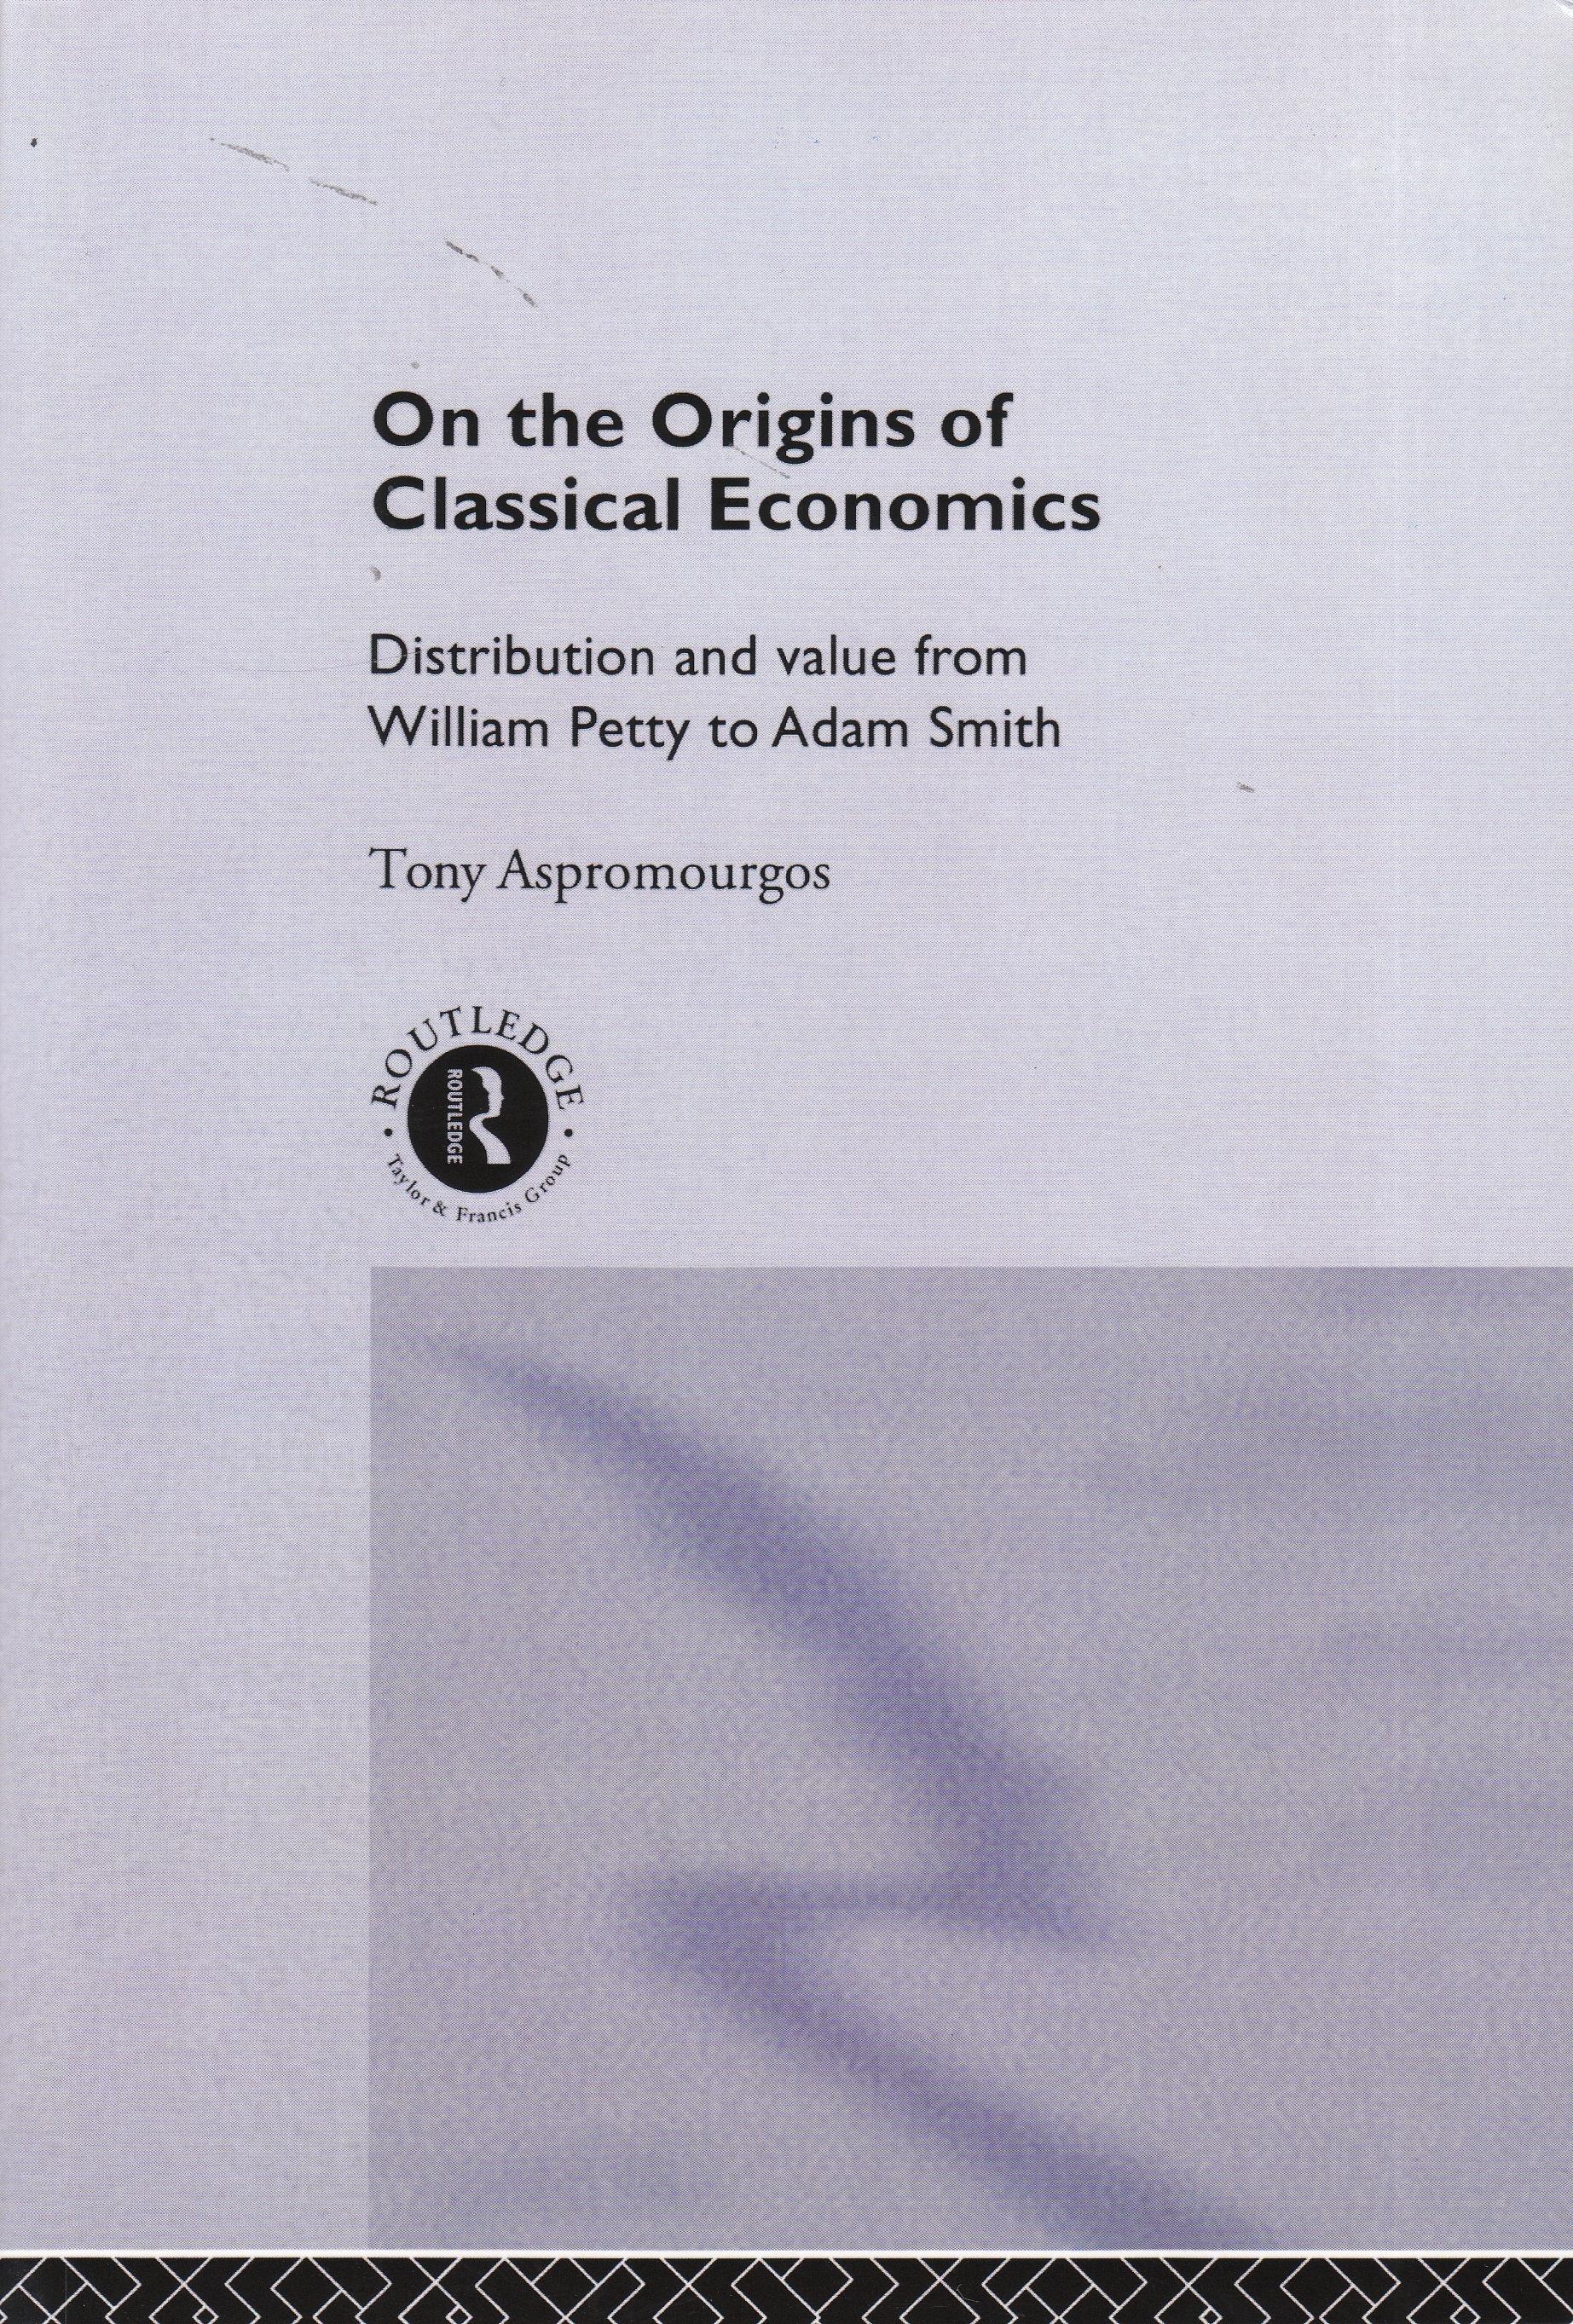 On the Origins of Classical Economics. "Distribution and value from William Petty to Adam Smith."